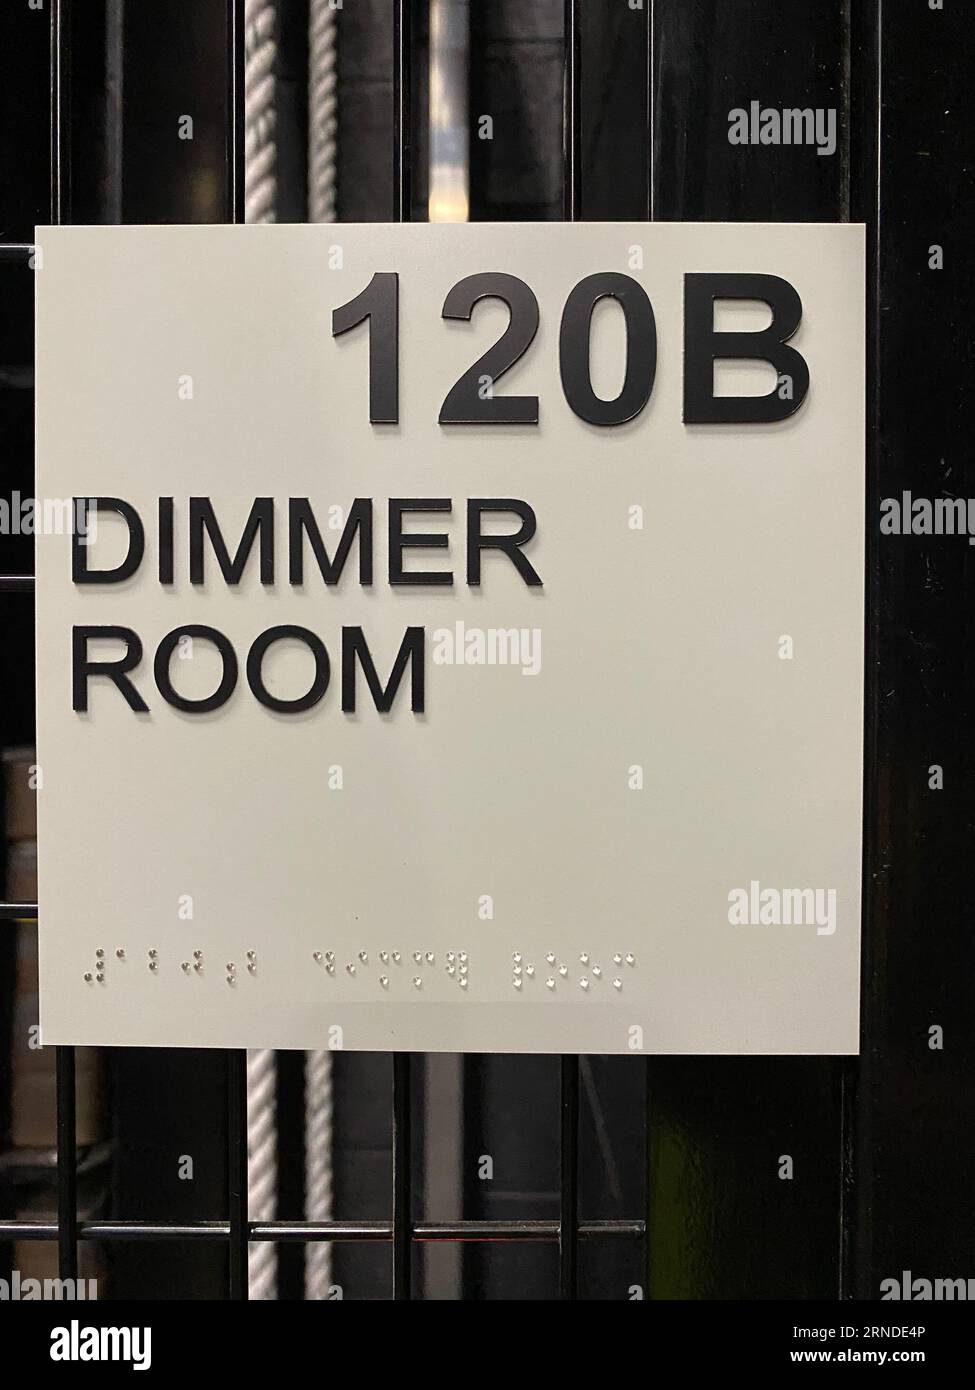 Dimmer Room sign with braille, on a door within a theater. Stock Photo